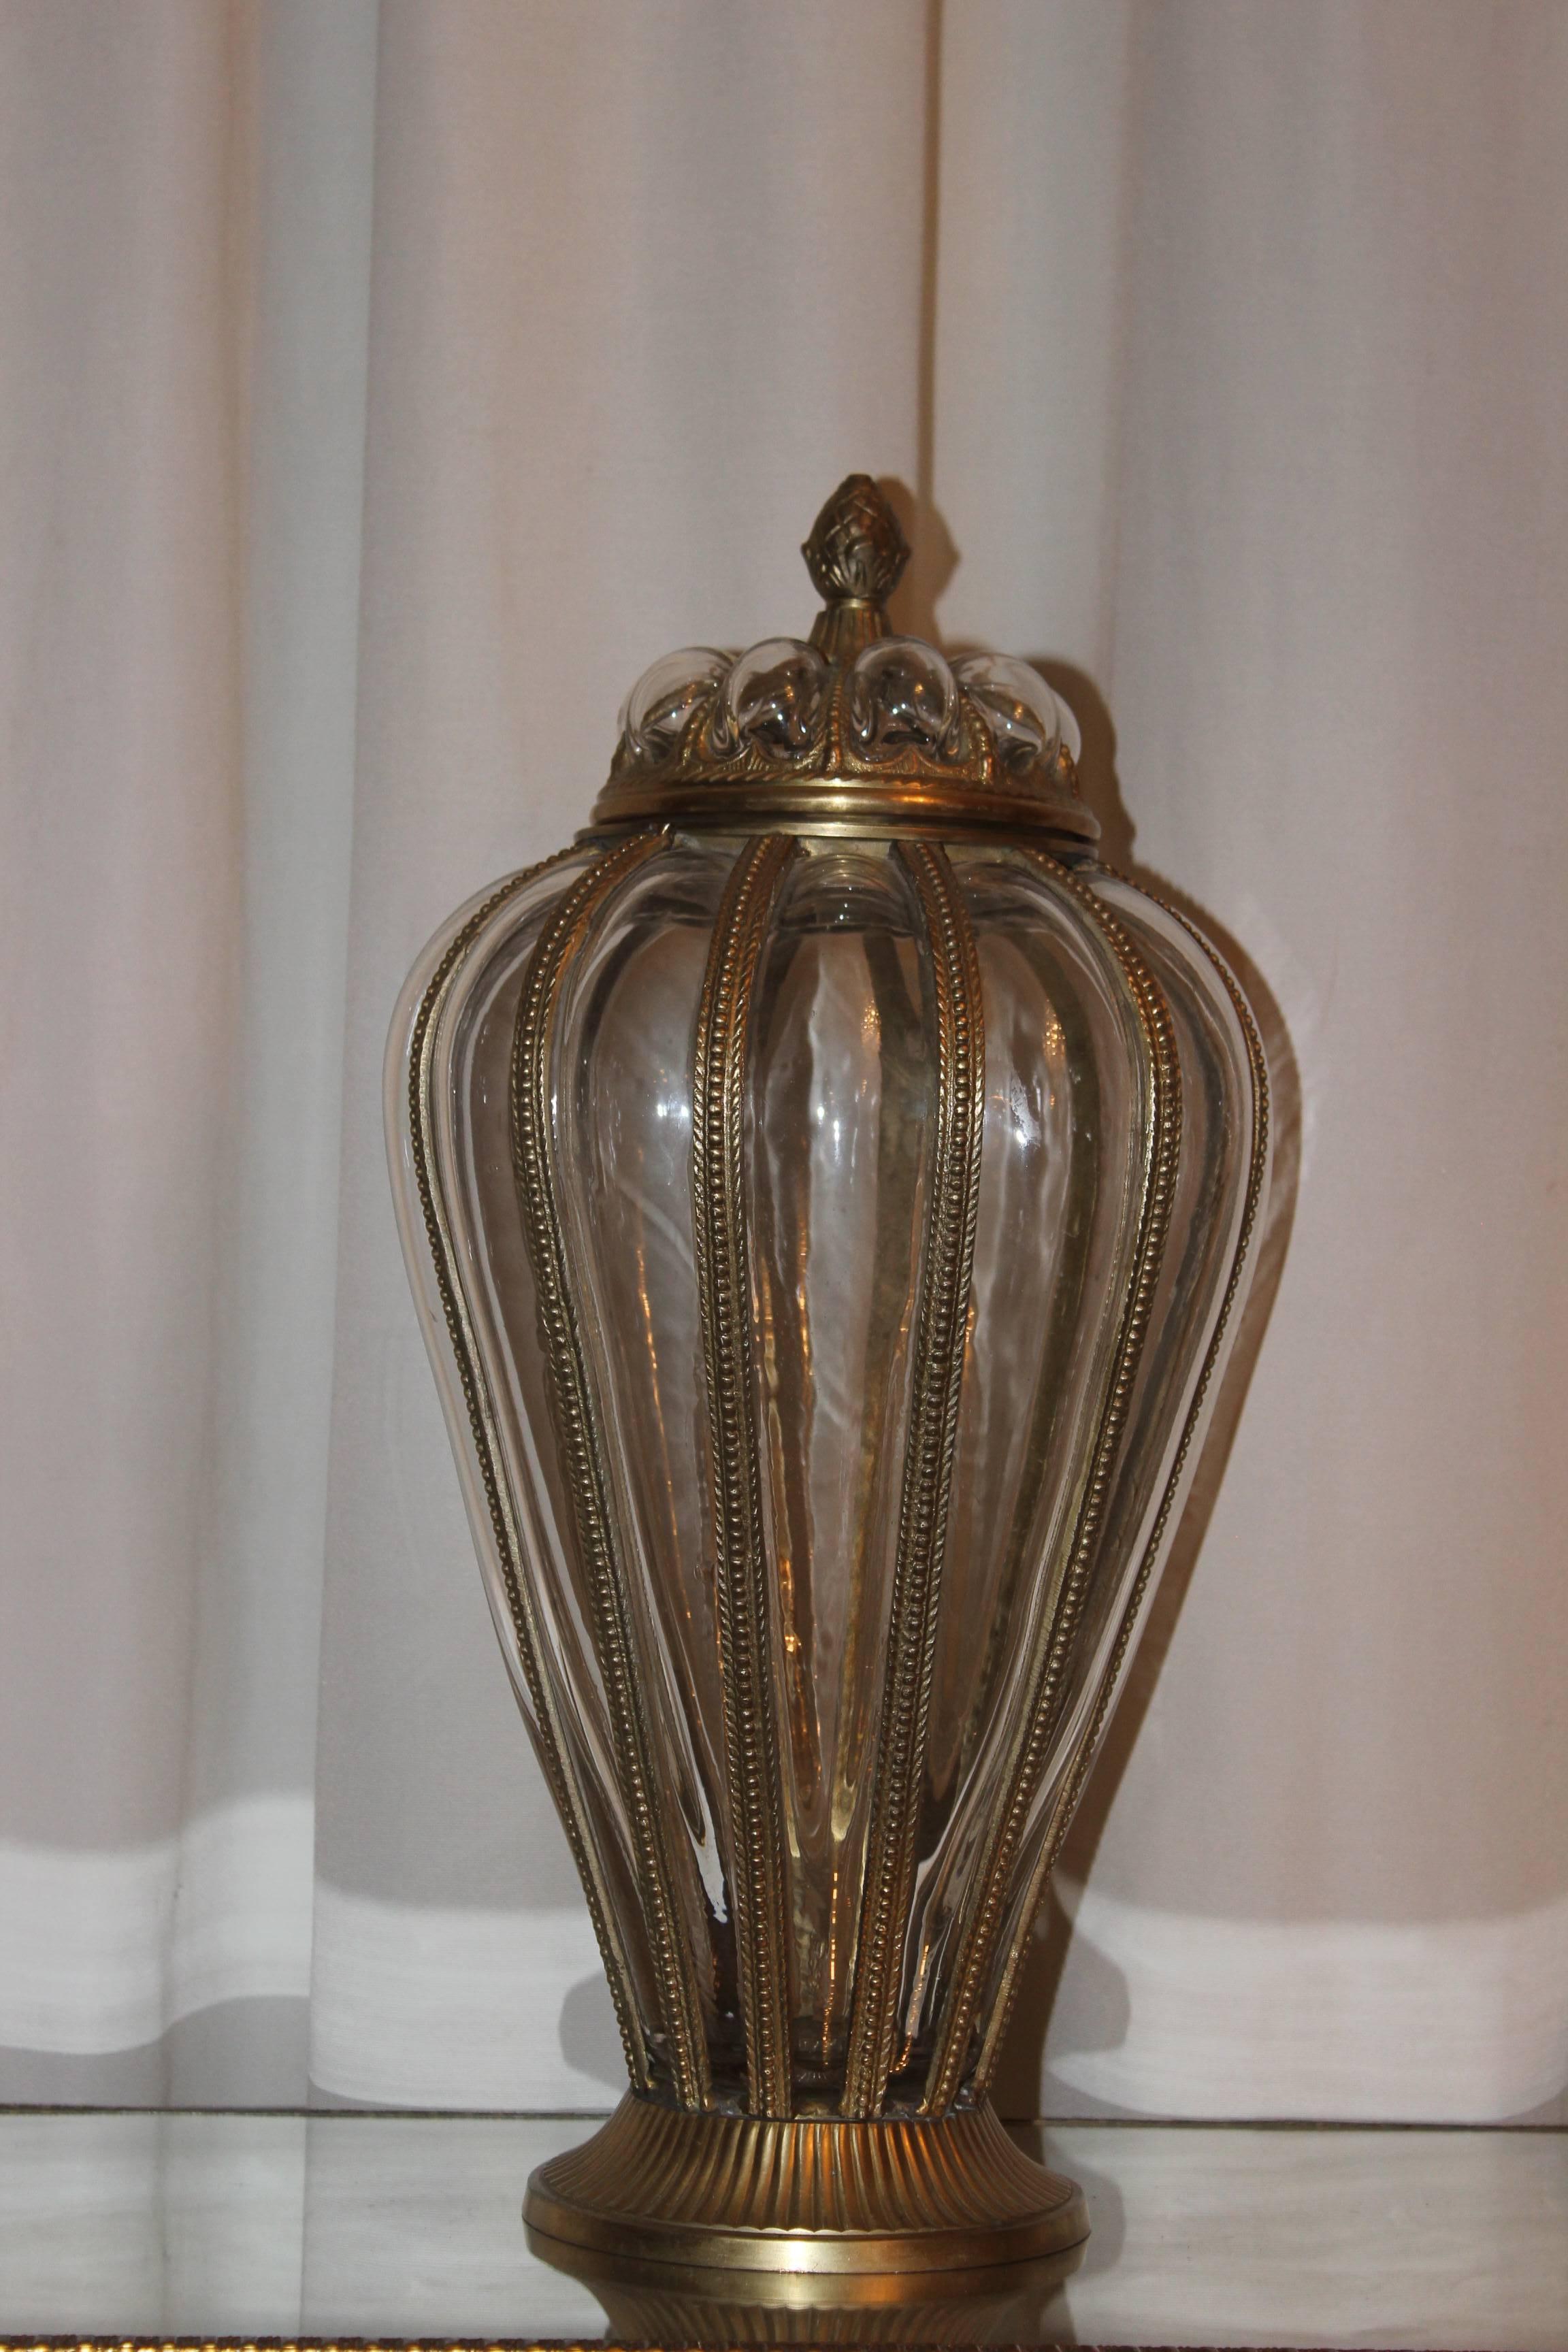 This is an Italian made handblown glass and brass vase with the clear glass being blown into a brass molded skeleton body. 

This type of work is more often associated with wrought iron framed bodies, usually as ceiling shades, with the glass being